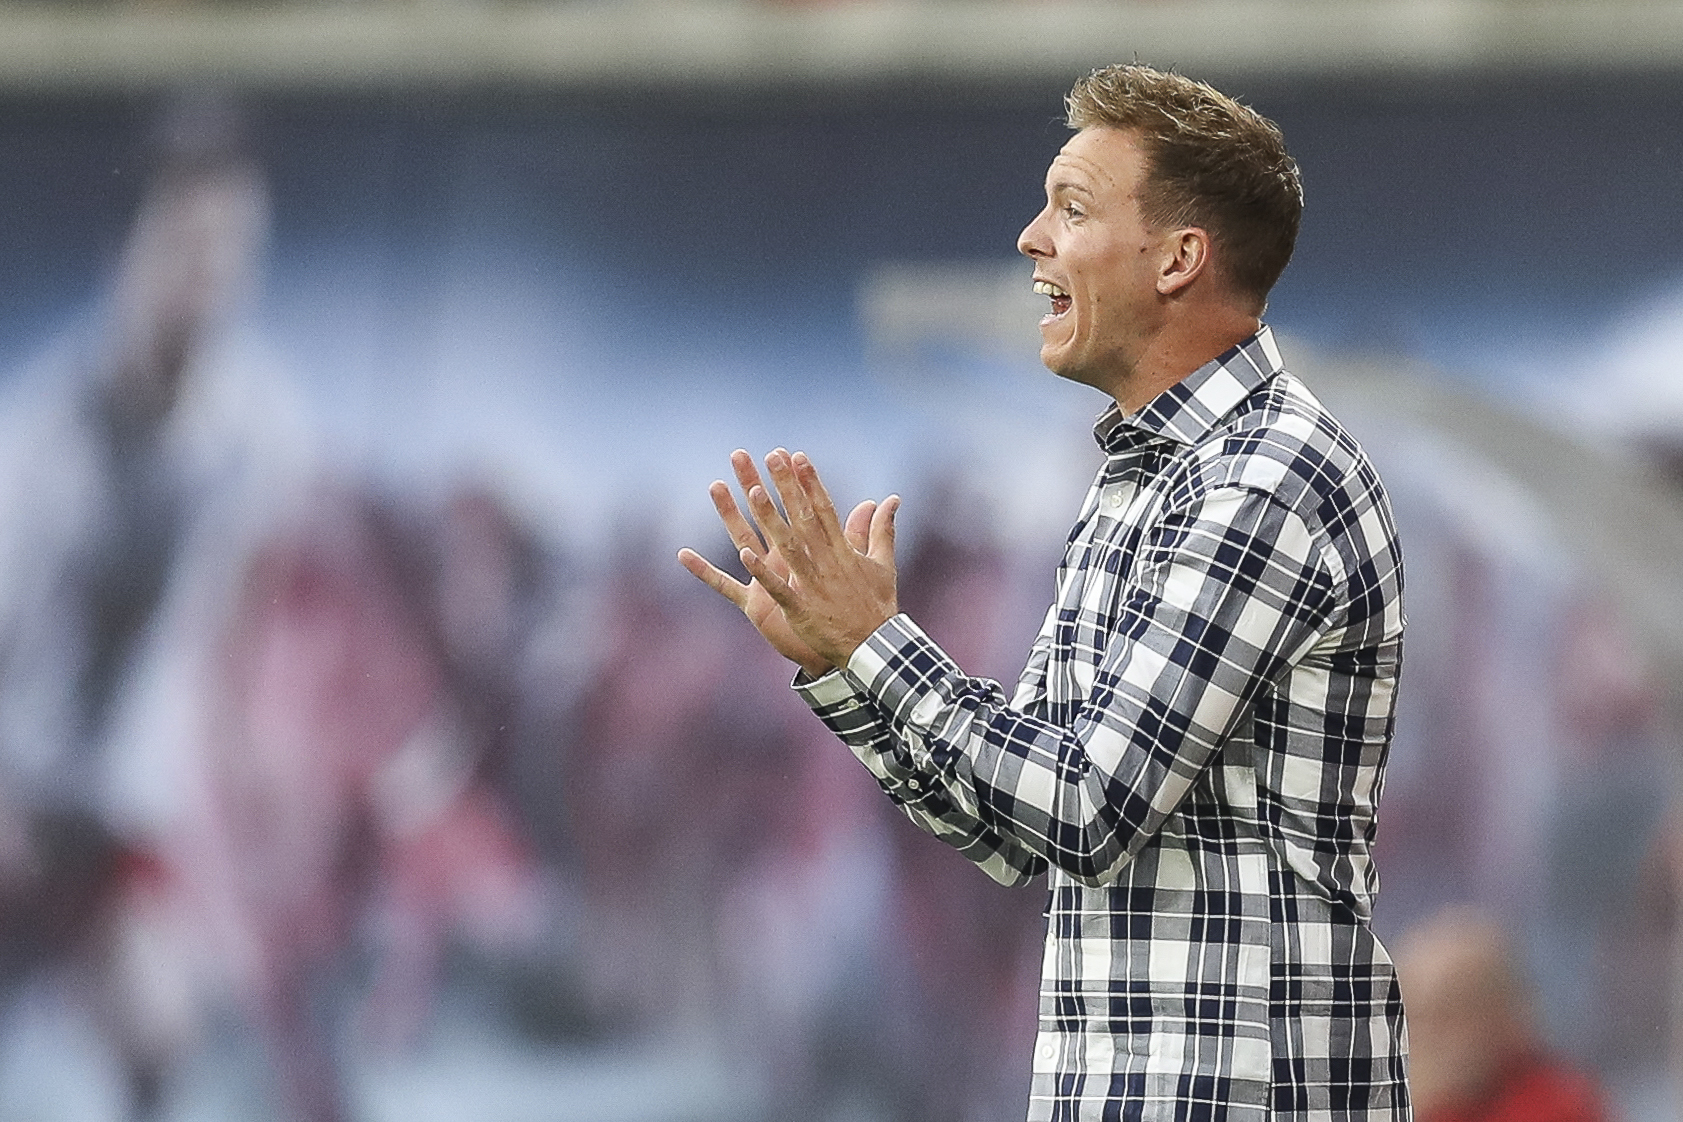 LEIPZIG, GERMANY - SEPTEMBER 14: Julian Nagelsmann head coach of RB Leipzig reacts during the Bundesliga match between RB Leipzig and FC Bayern Muenchen at Red Bull Arena on September 14, 2019 in Leipzig, Germany. (Photo by Maja Hitij/Bongarts/Getty Images)